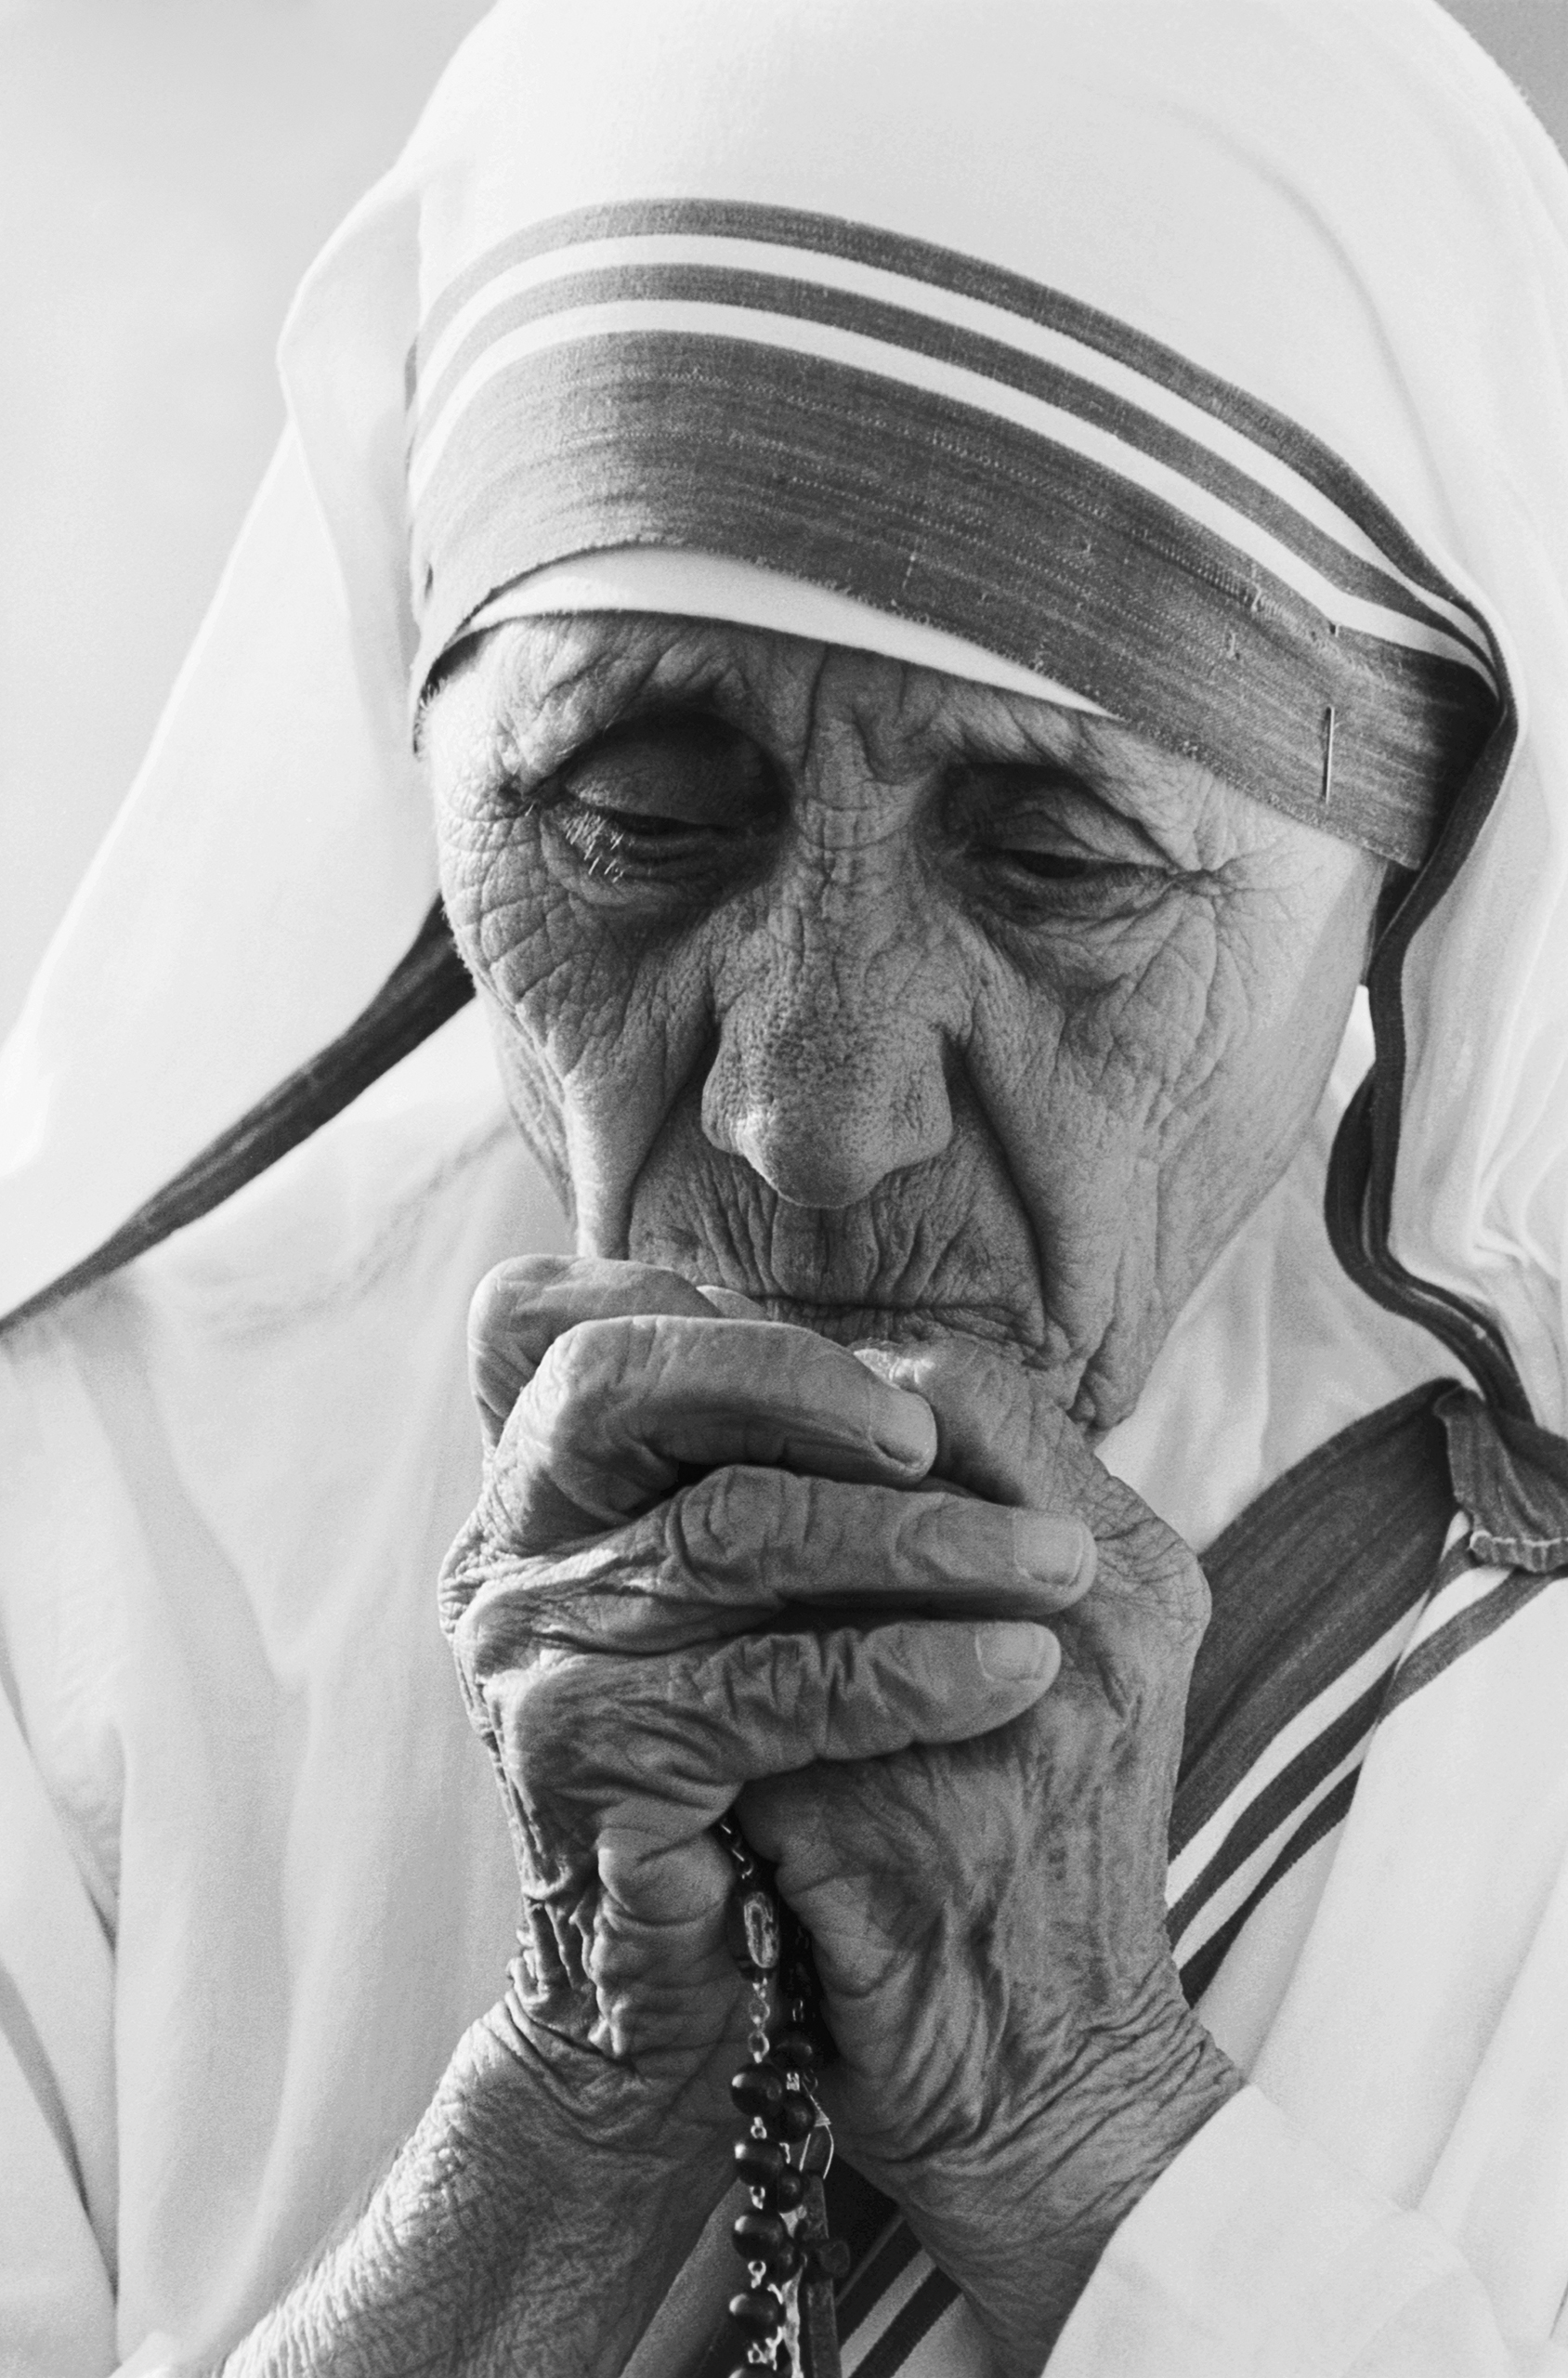 Nobel Peace Prize winner Mother Teresa prays during the dedication ceremonies at her 400th worldwide mission to care for the poor in Tijuana, Mexico. The Tijuana mission will shelter the homeless, the terminally ill and unwed mothers.